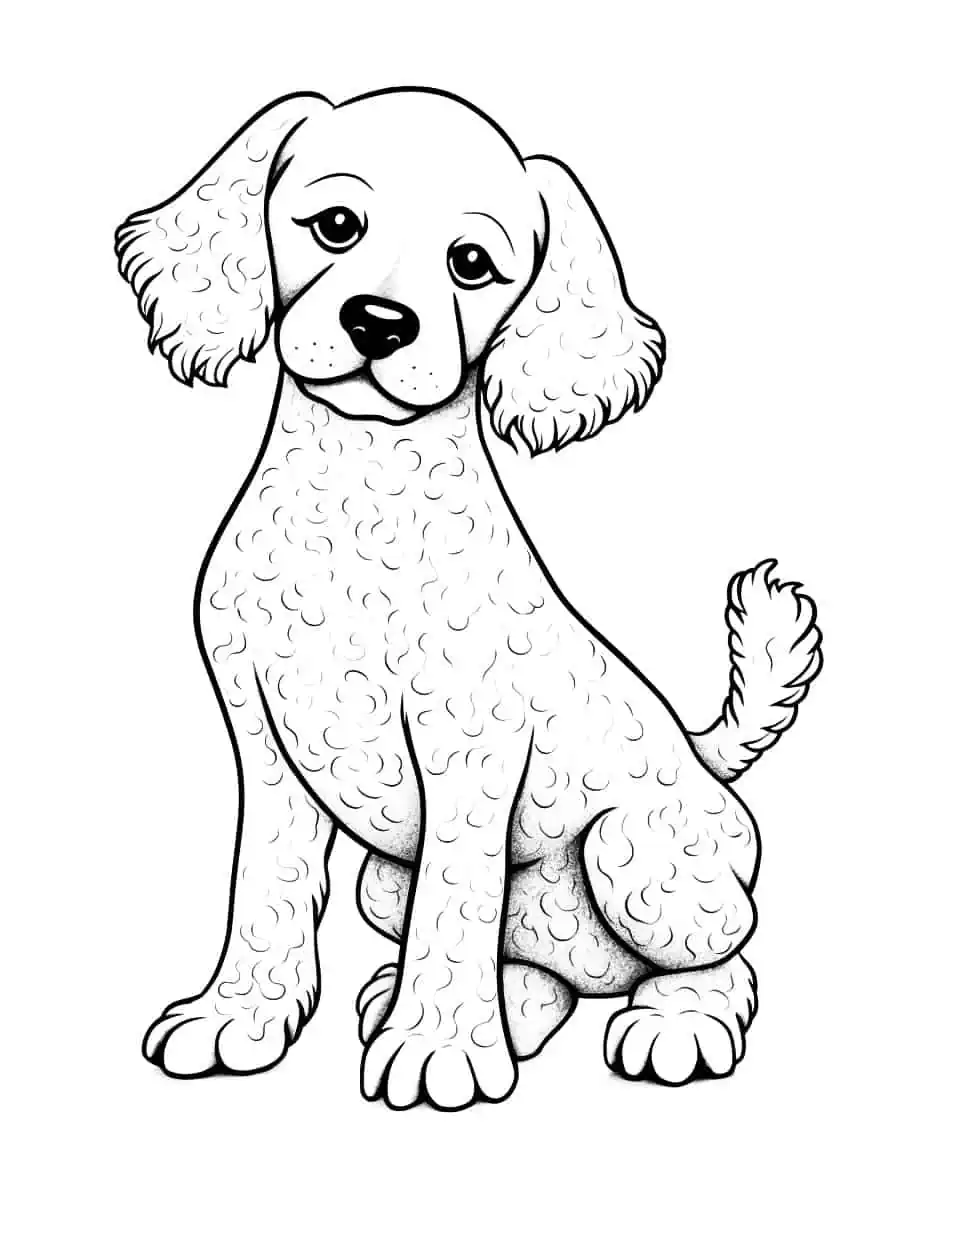 Advanced Poodle Drawing Dog Coloring Page - An advanced-level drawing of a Poodle in a stylish pose for older kids.